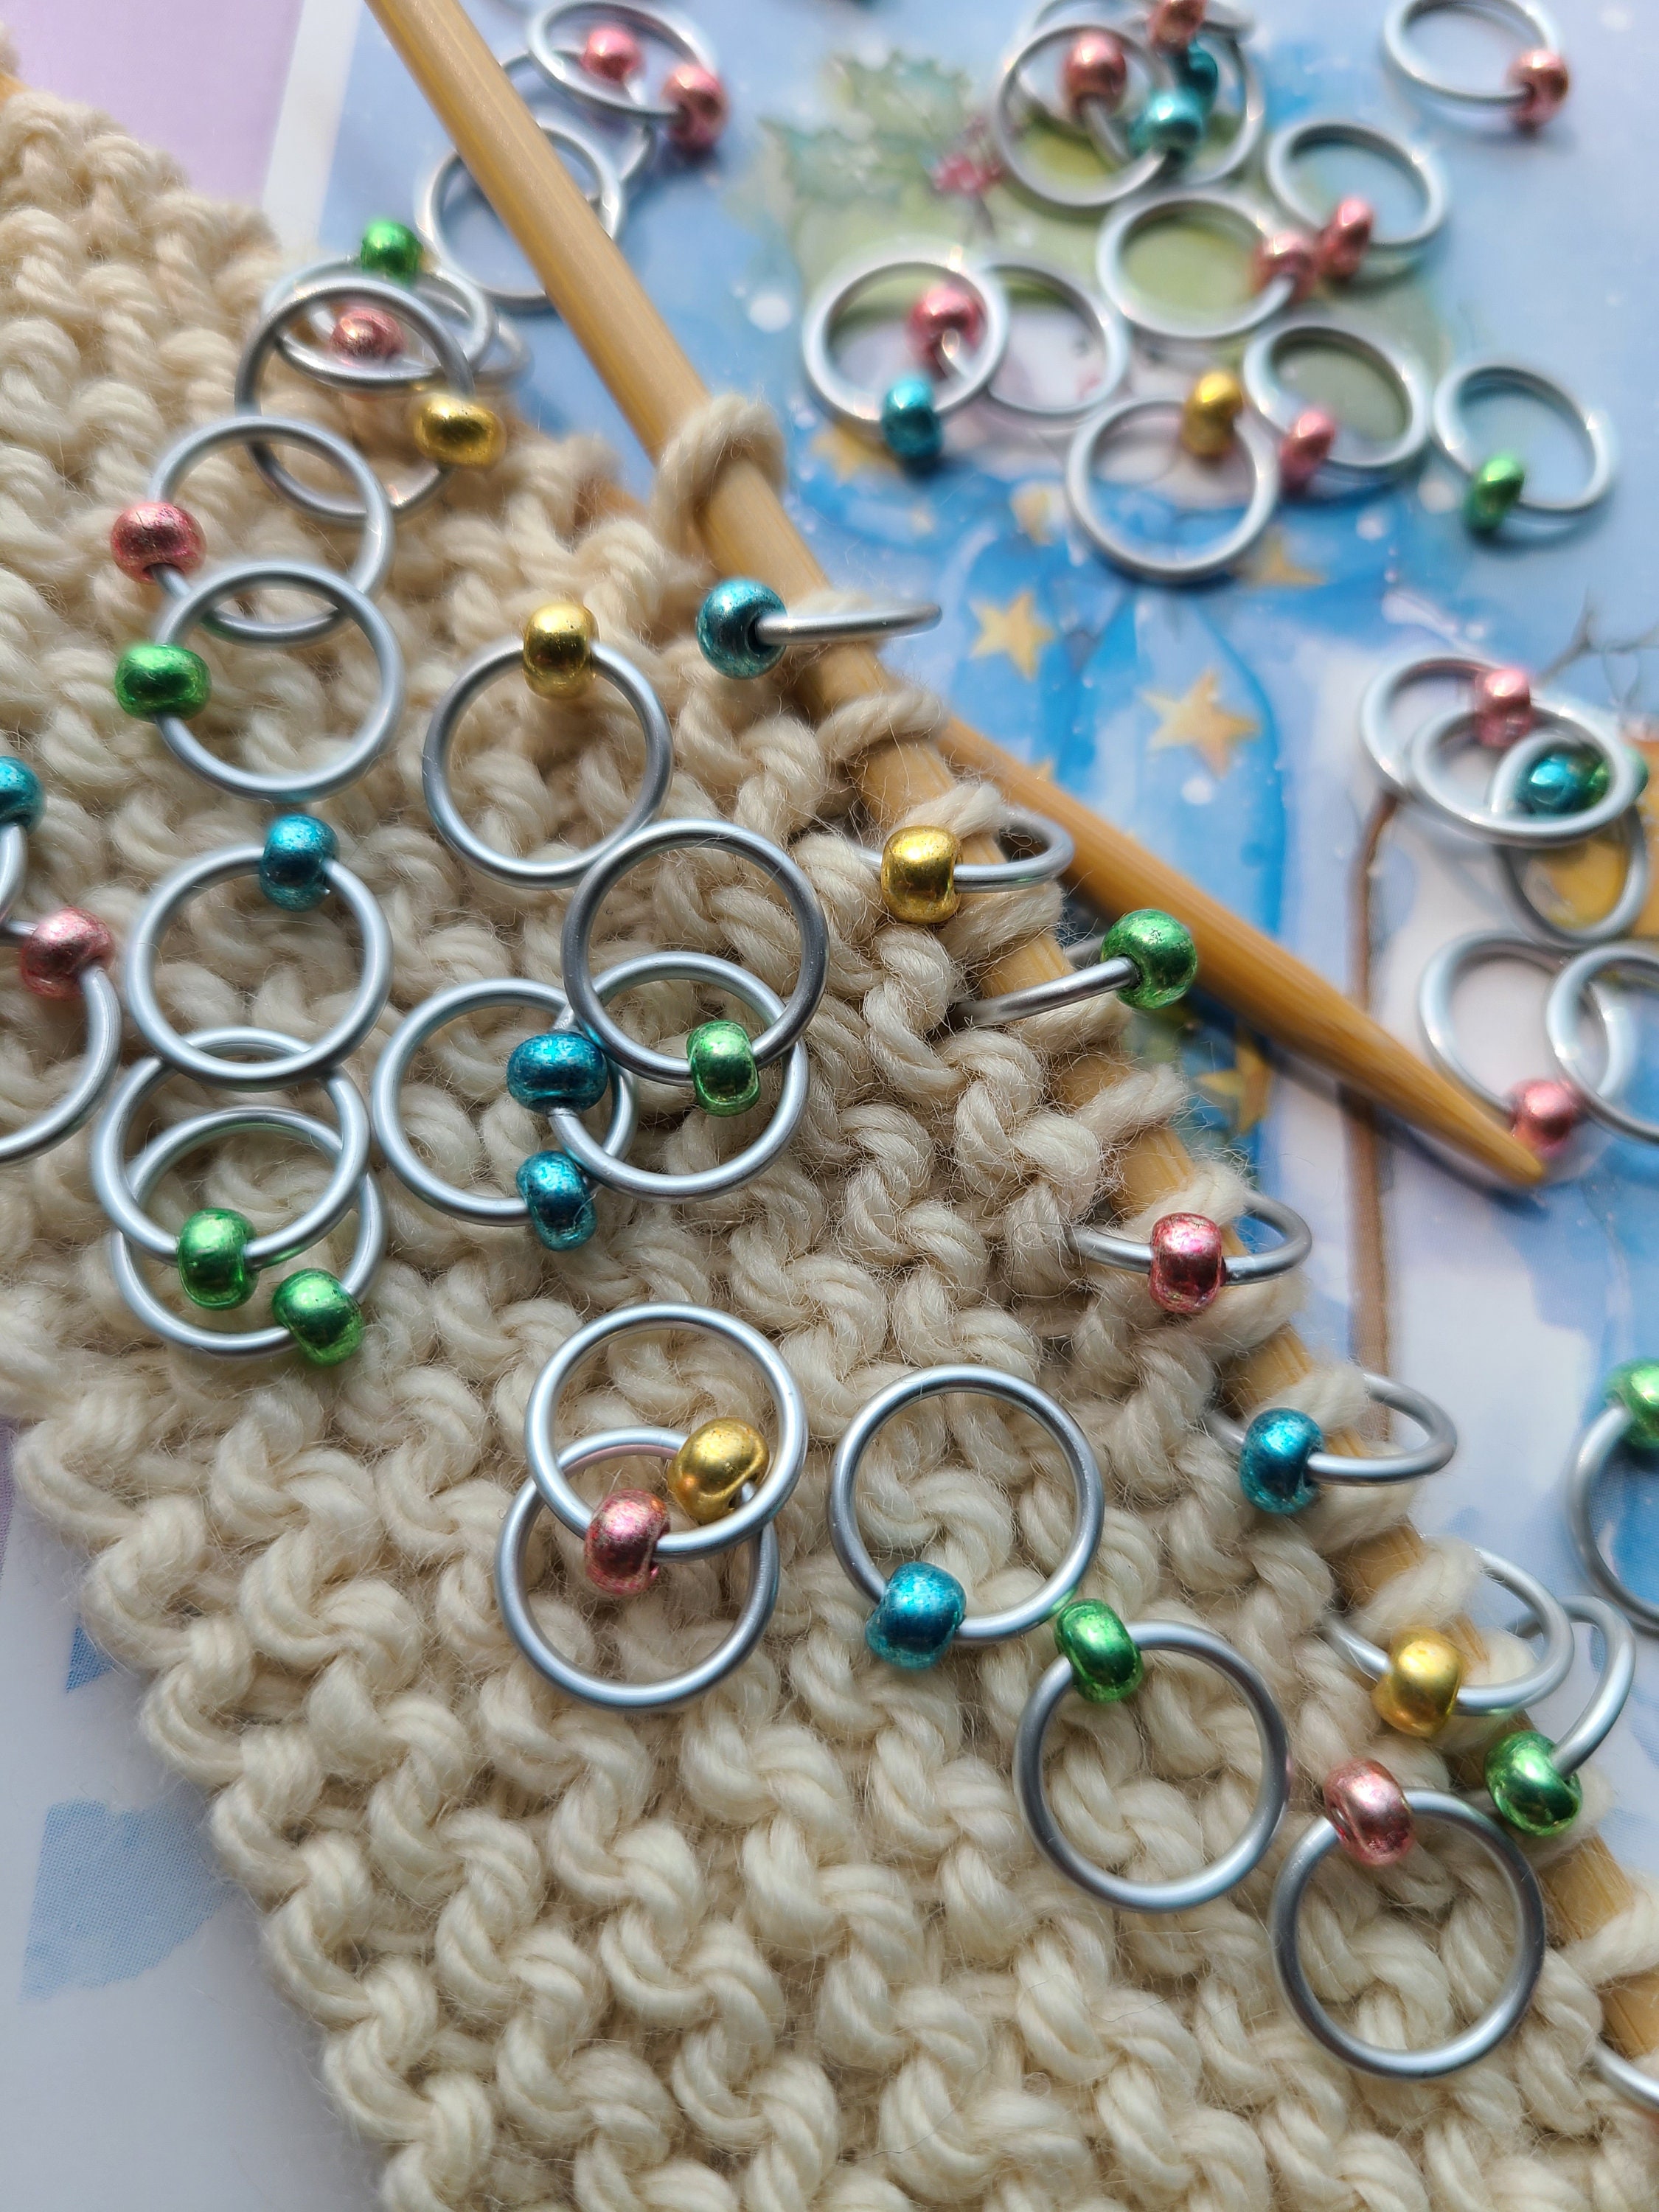 ful Bulb Pins For Crafting, Sewing, Knitting, And Crochet Includes Locking  Stitch Locking Stitch Markers, Progress Keepers & Safety Pockets From  Samgamibaby, $15.08